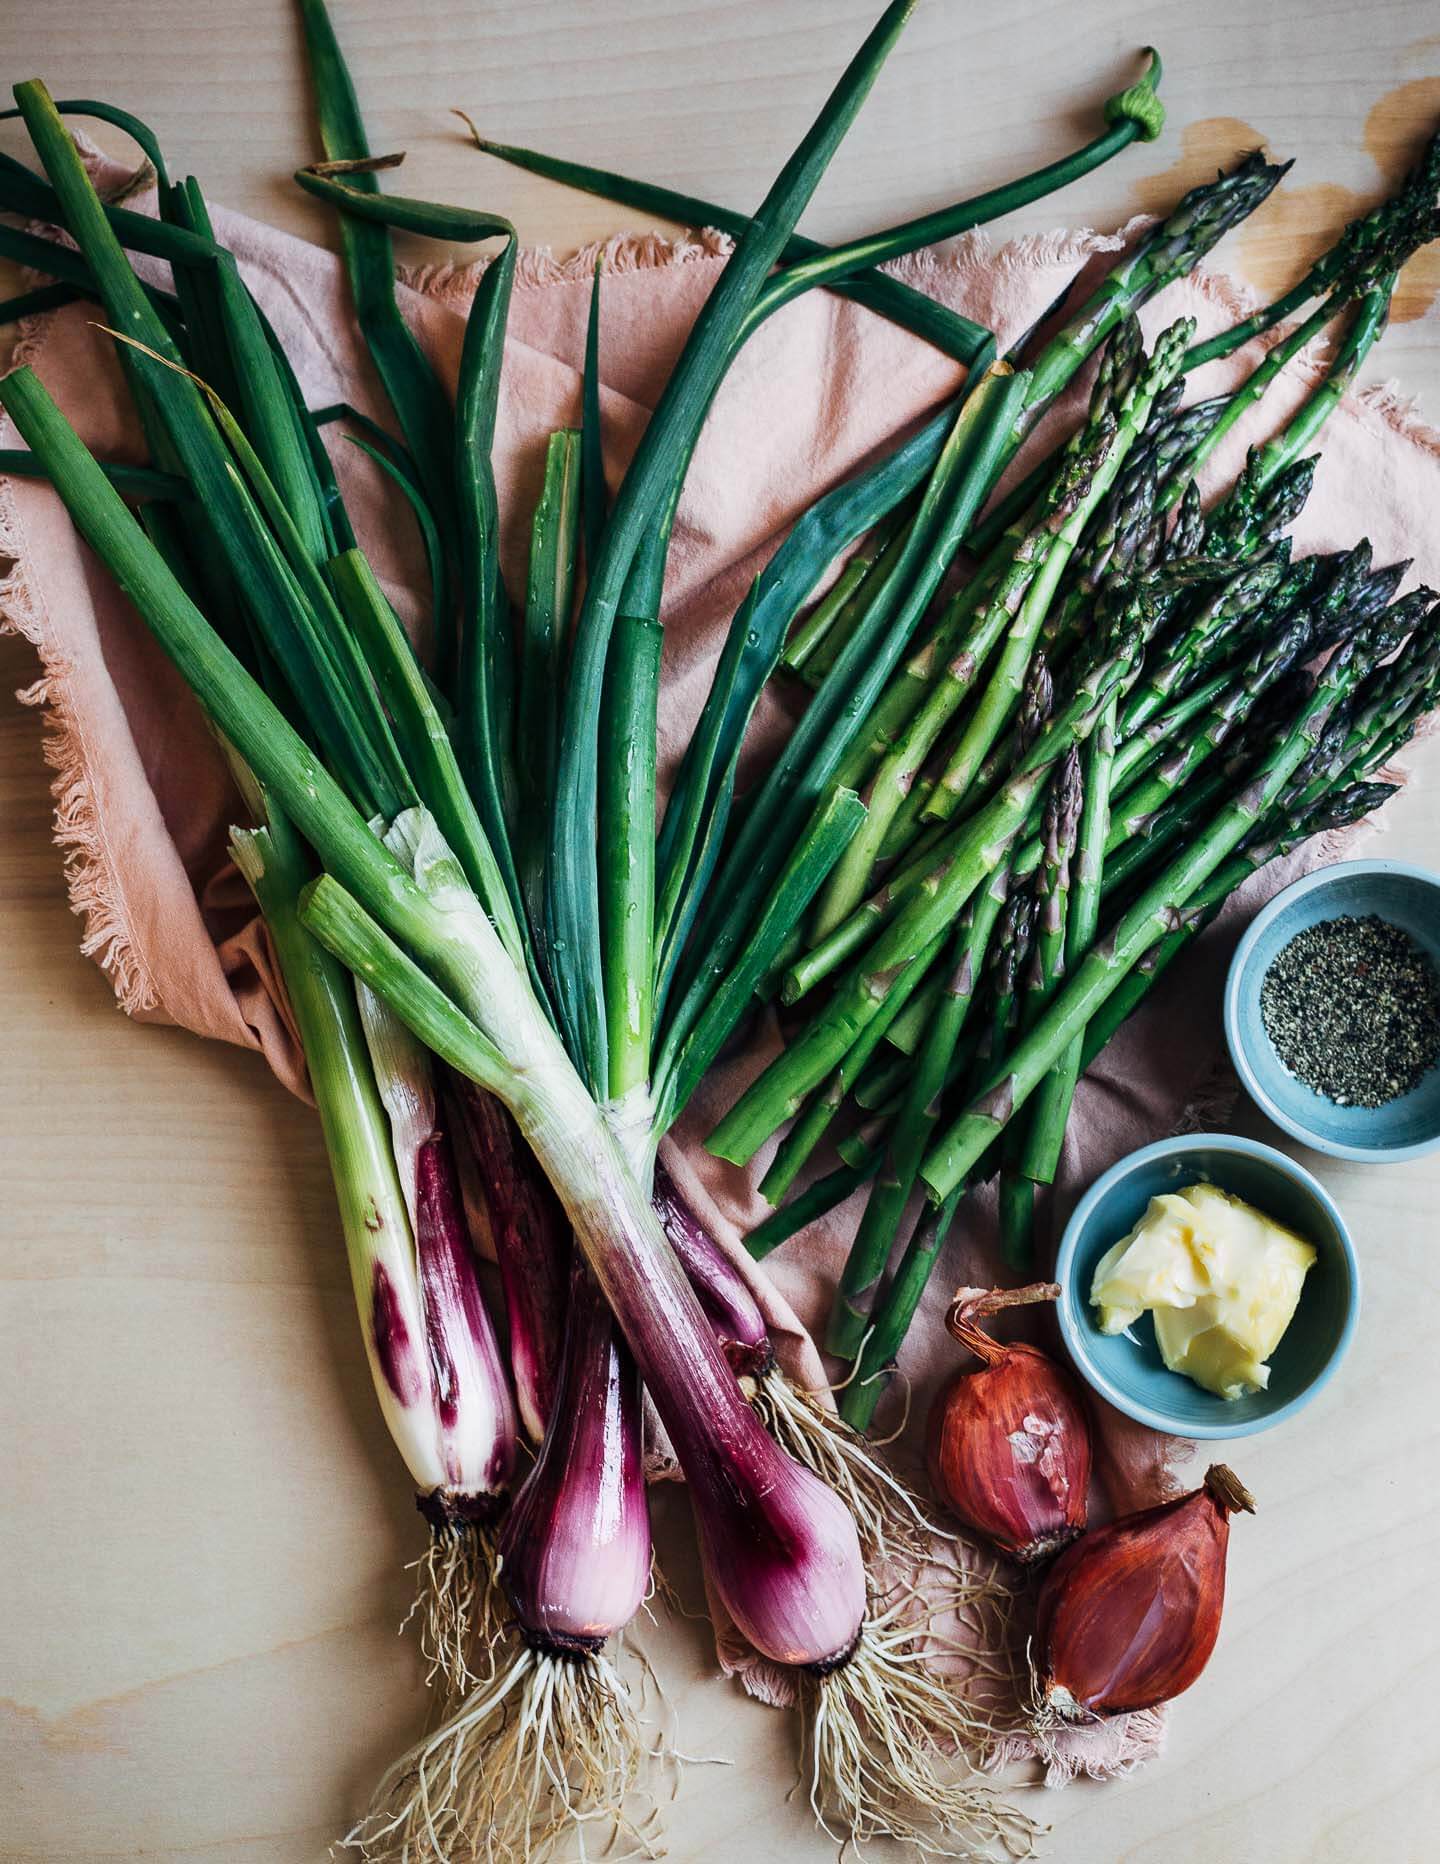 A flatlay with spring onions, asparagus, and shallots, plus little bowls with butter and black pepper